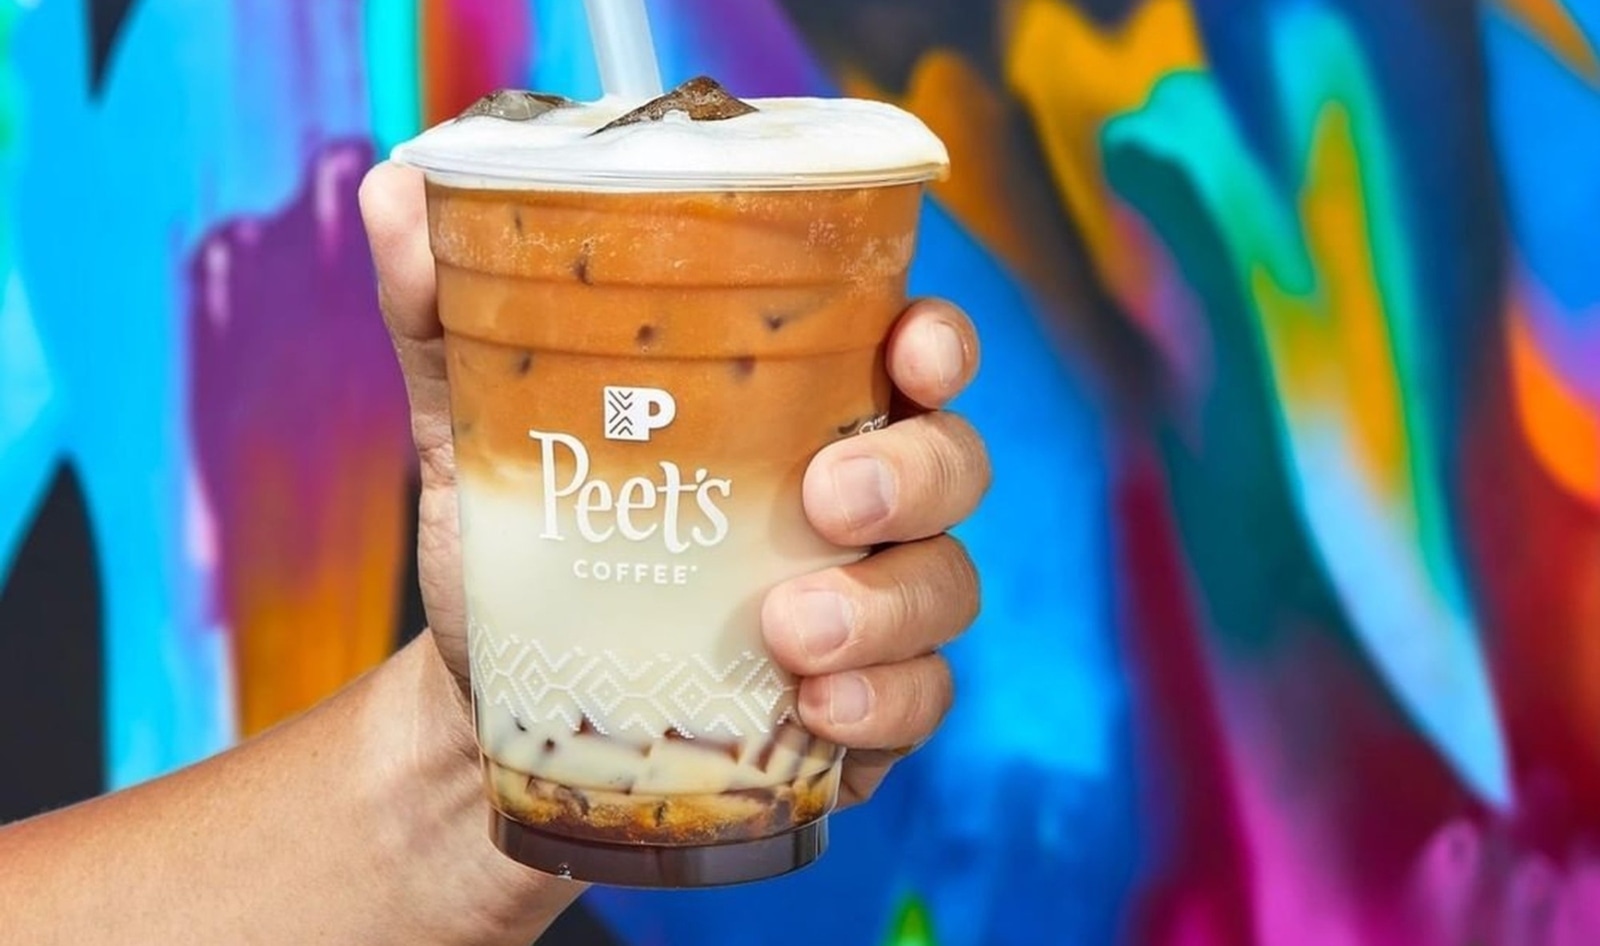 Summer Sips at Peet's: Your Guide to the Chain's Most Refreshing Vegan Drink Options